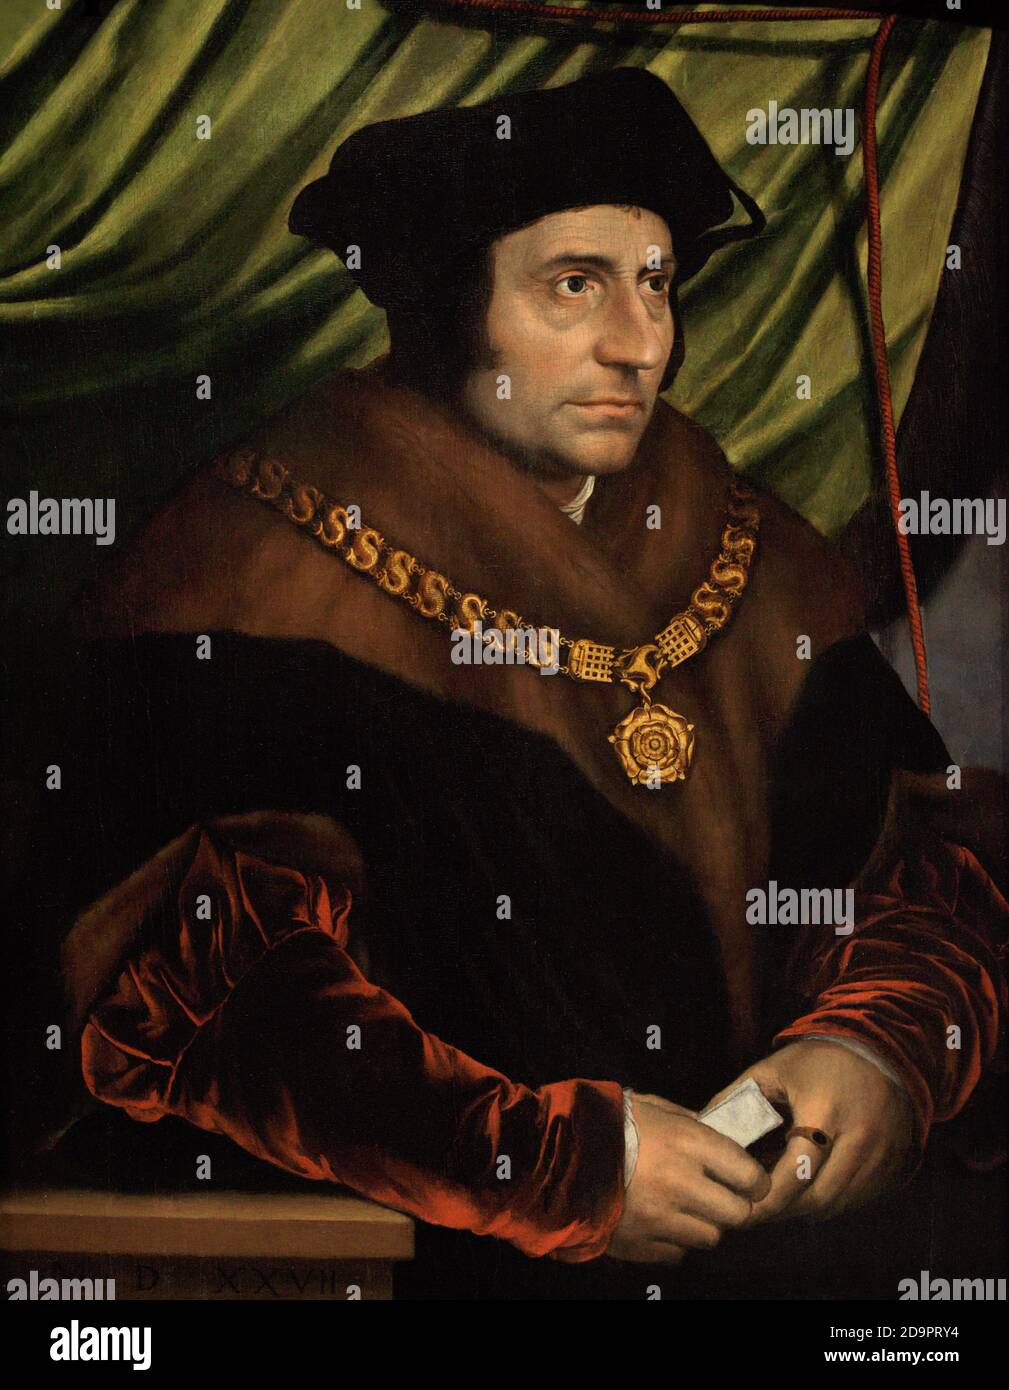 Sir Thomas More (1478-1535). English humanist and social philosopher. Chancellor of England (1529-1532). He opposed the King's divorce from Katherine of Aragon, refusing to take the Oath of Supremacy, which acknowledged Henry as head of the Church of England. He was executed for treason on Tower Hill, London, on July 6, 1535. Portrait by an unknown artist after Hans Holbein the Younger. Oil on panel, early 17th century (after a portrait of 1527). National Portrait Gallery. London, England, United Kingdom. Stock Photo